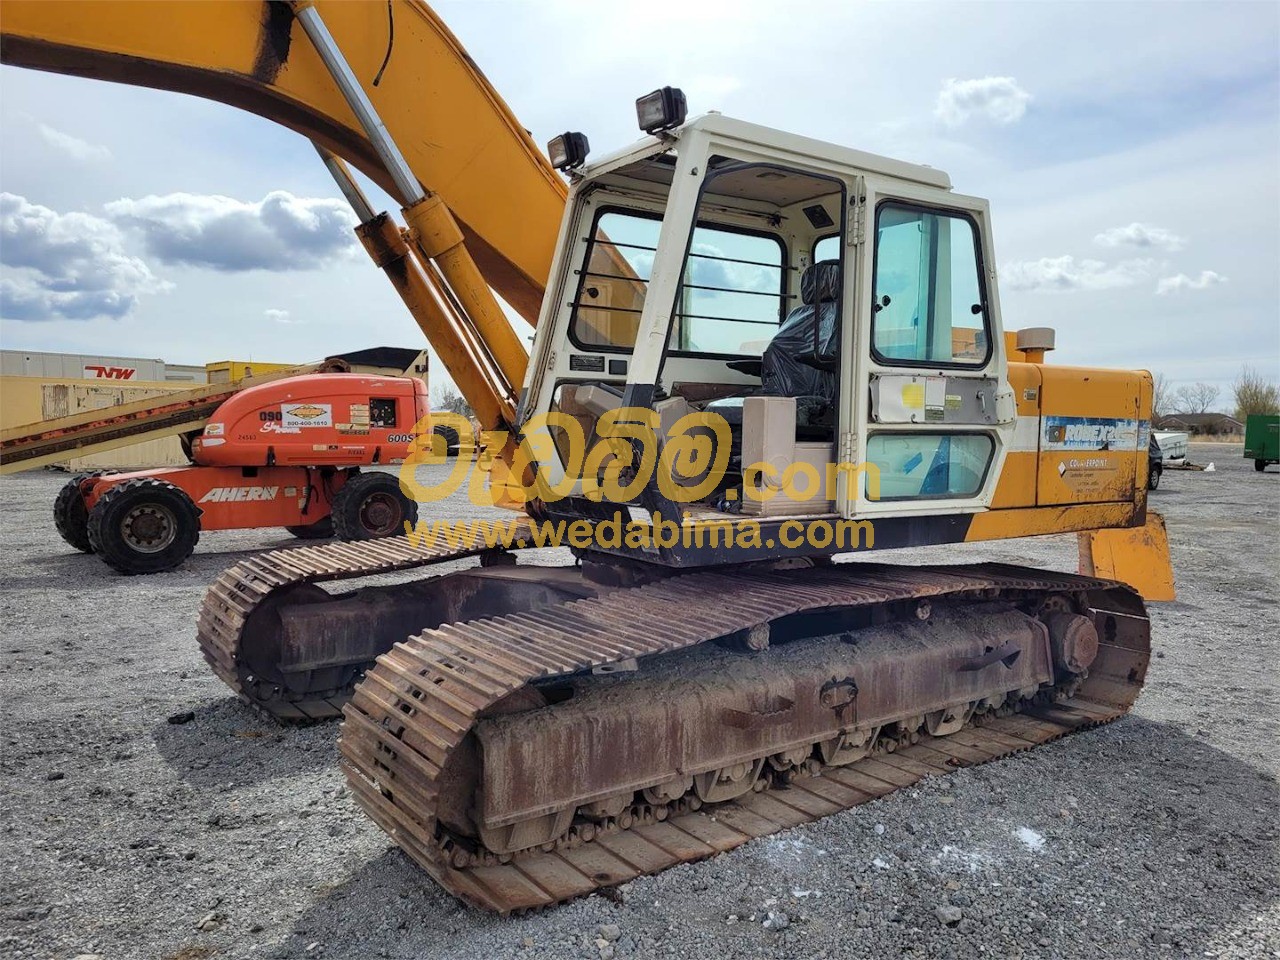 200 Excavator for Hire - Kandy